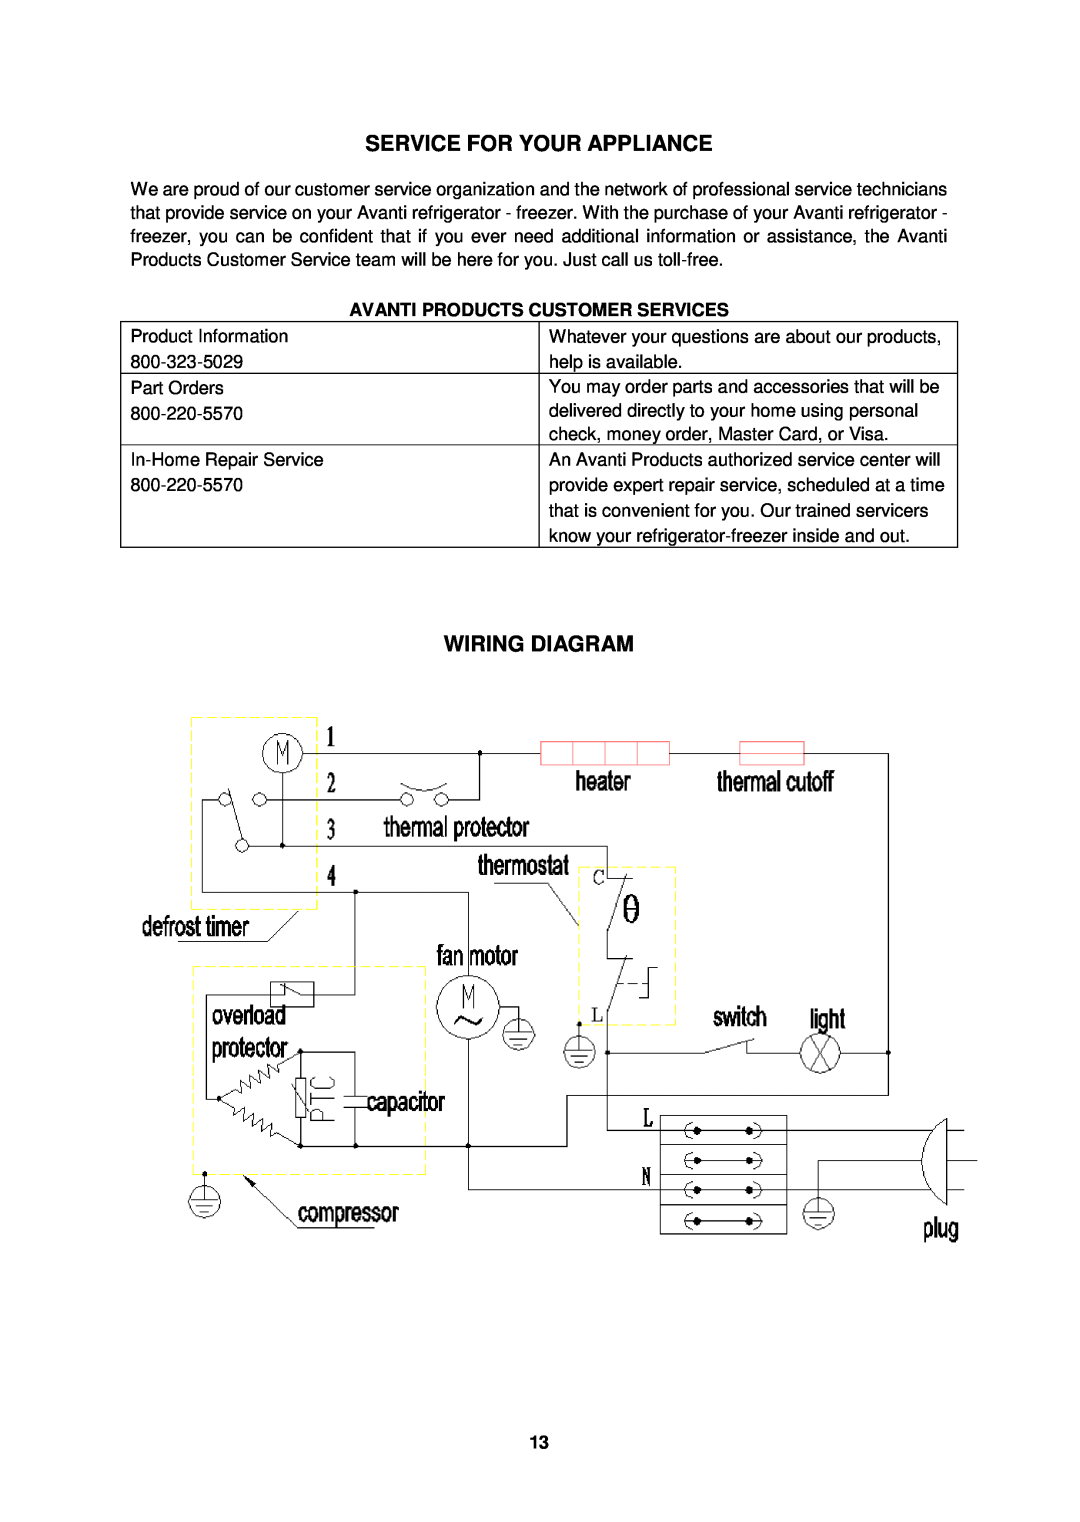 Avanti FF993W, FF994PS instruction manual Service For Your Appliance, Wiring Diagram, Avanti Products Customer Services 